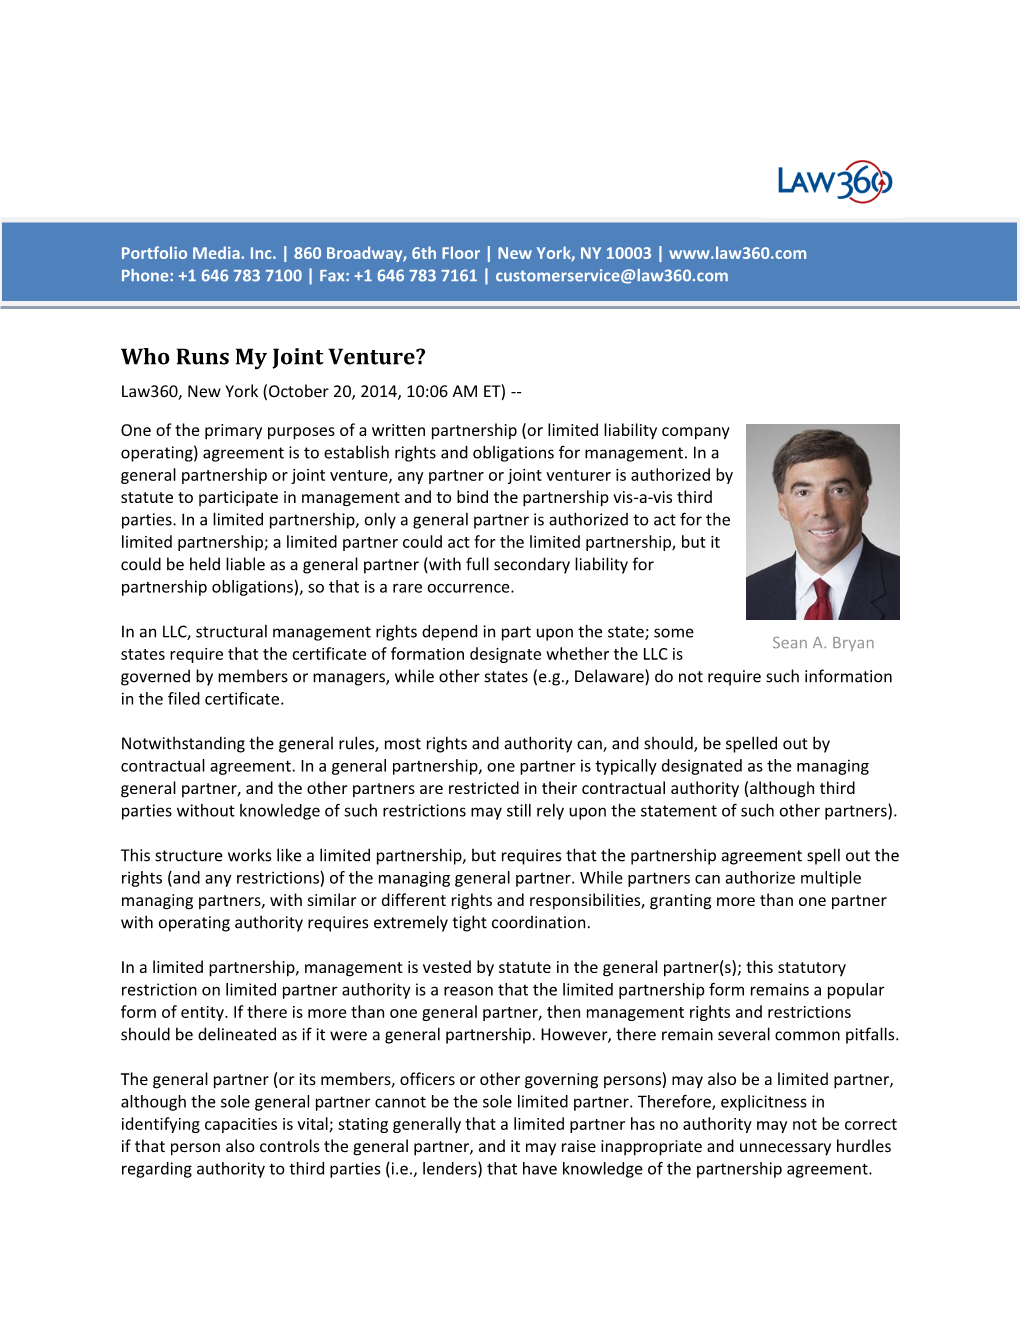 Who Runs My Joint Venture? Law360, New York (October 20, 2014, 10:06 AM ET)